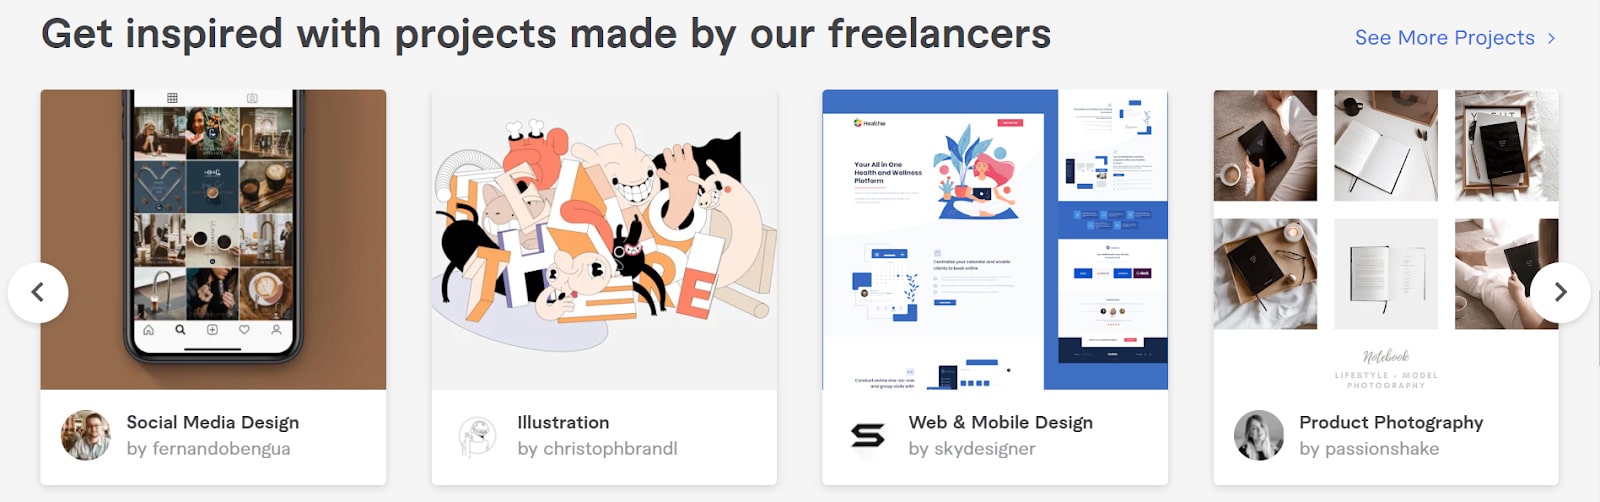 Examples of projects made by freelancers available on Fiverr.